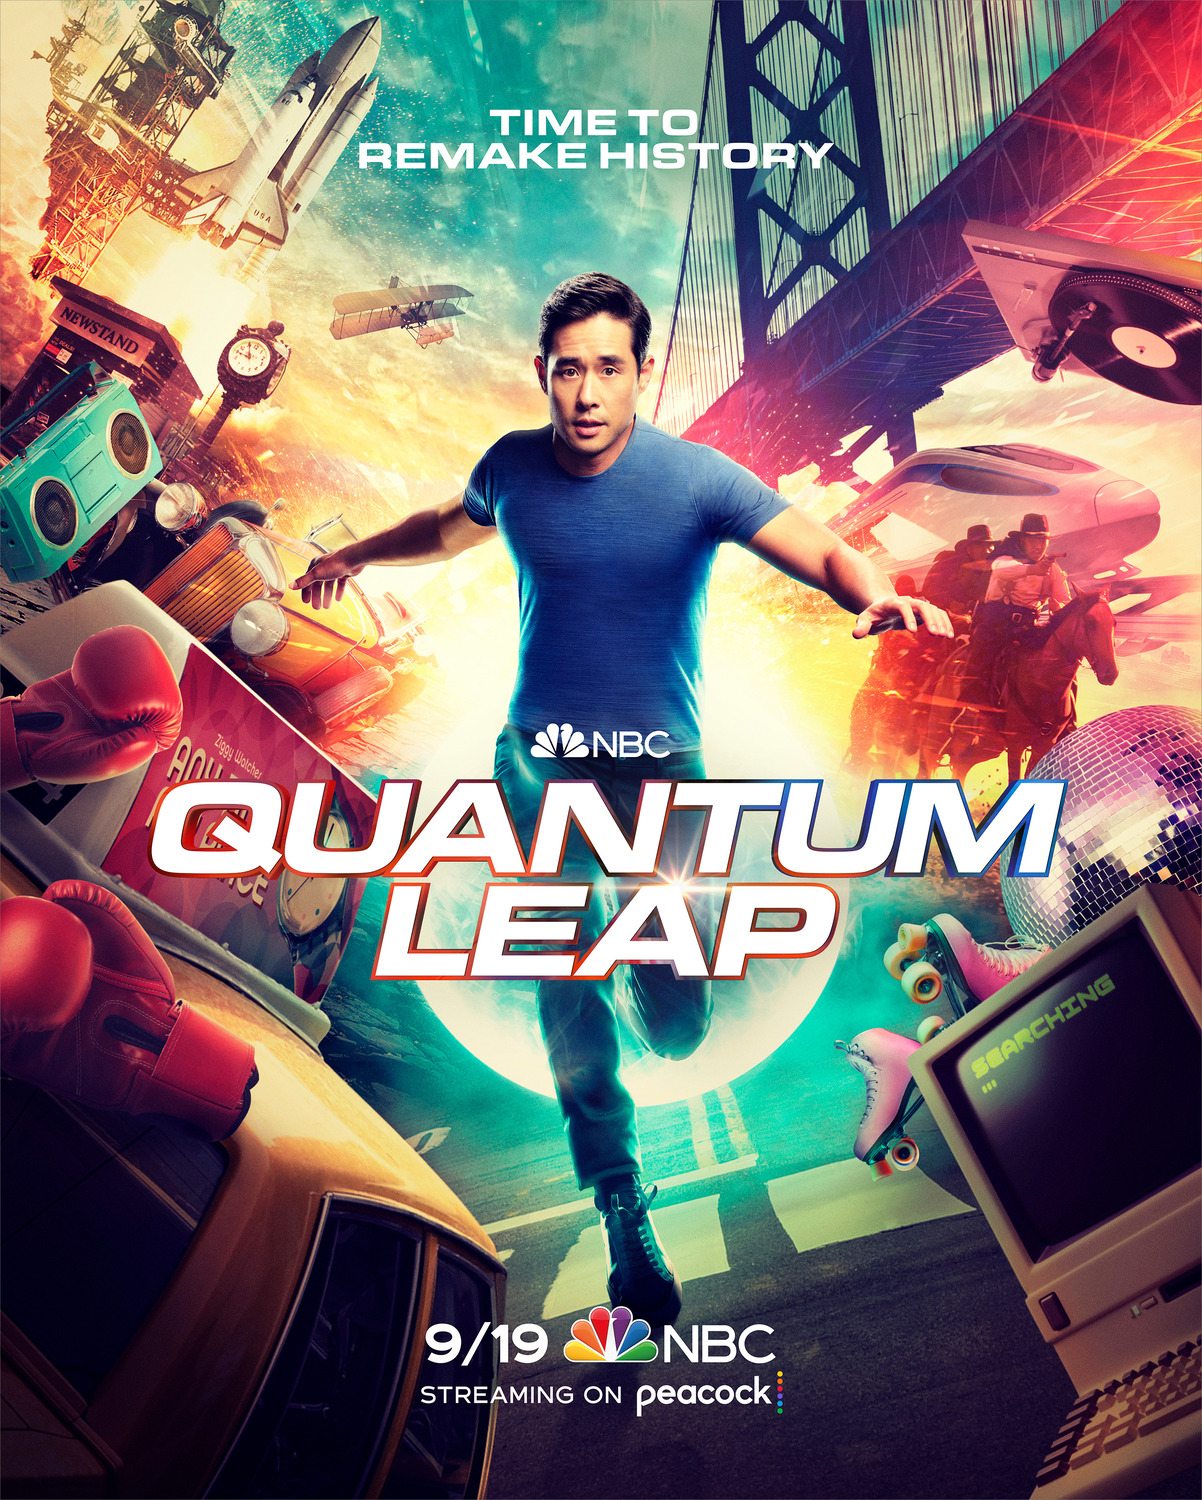 Extra Large Movie Poster Image for Quantum Leap 